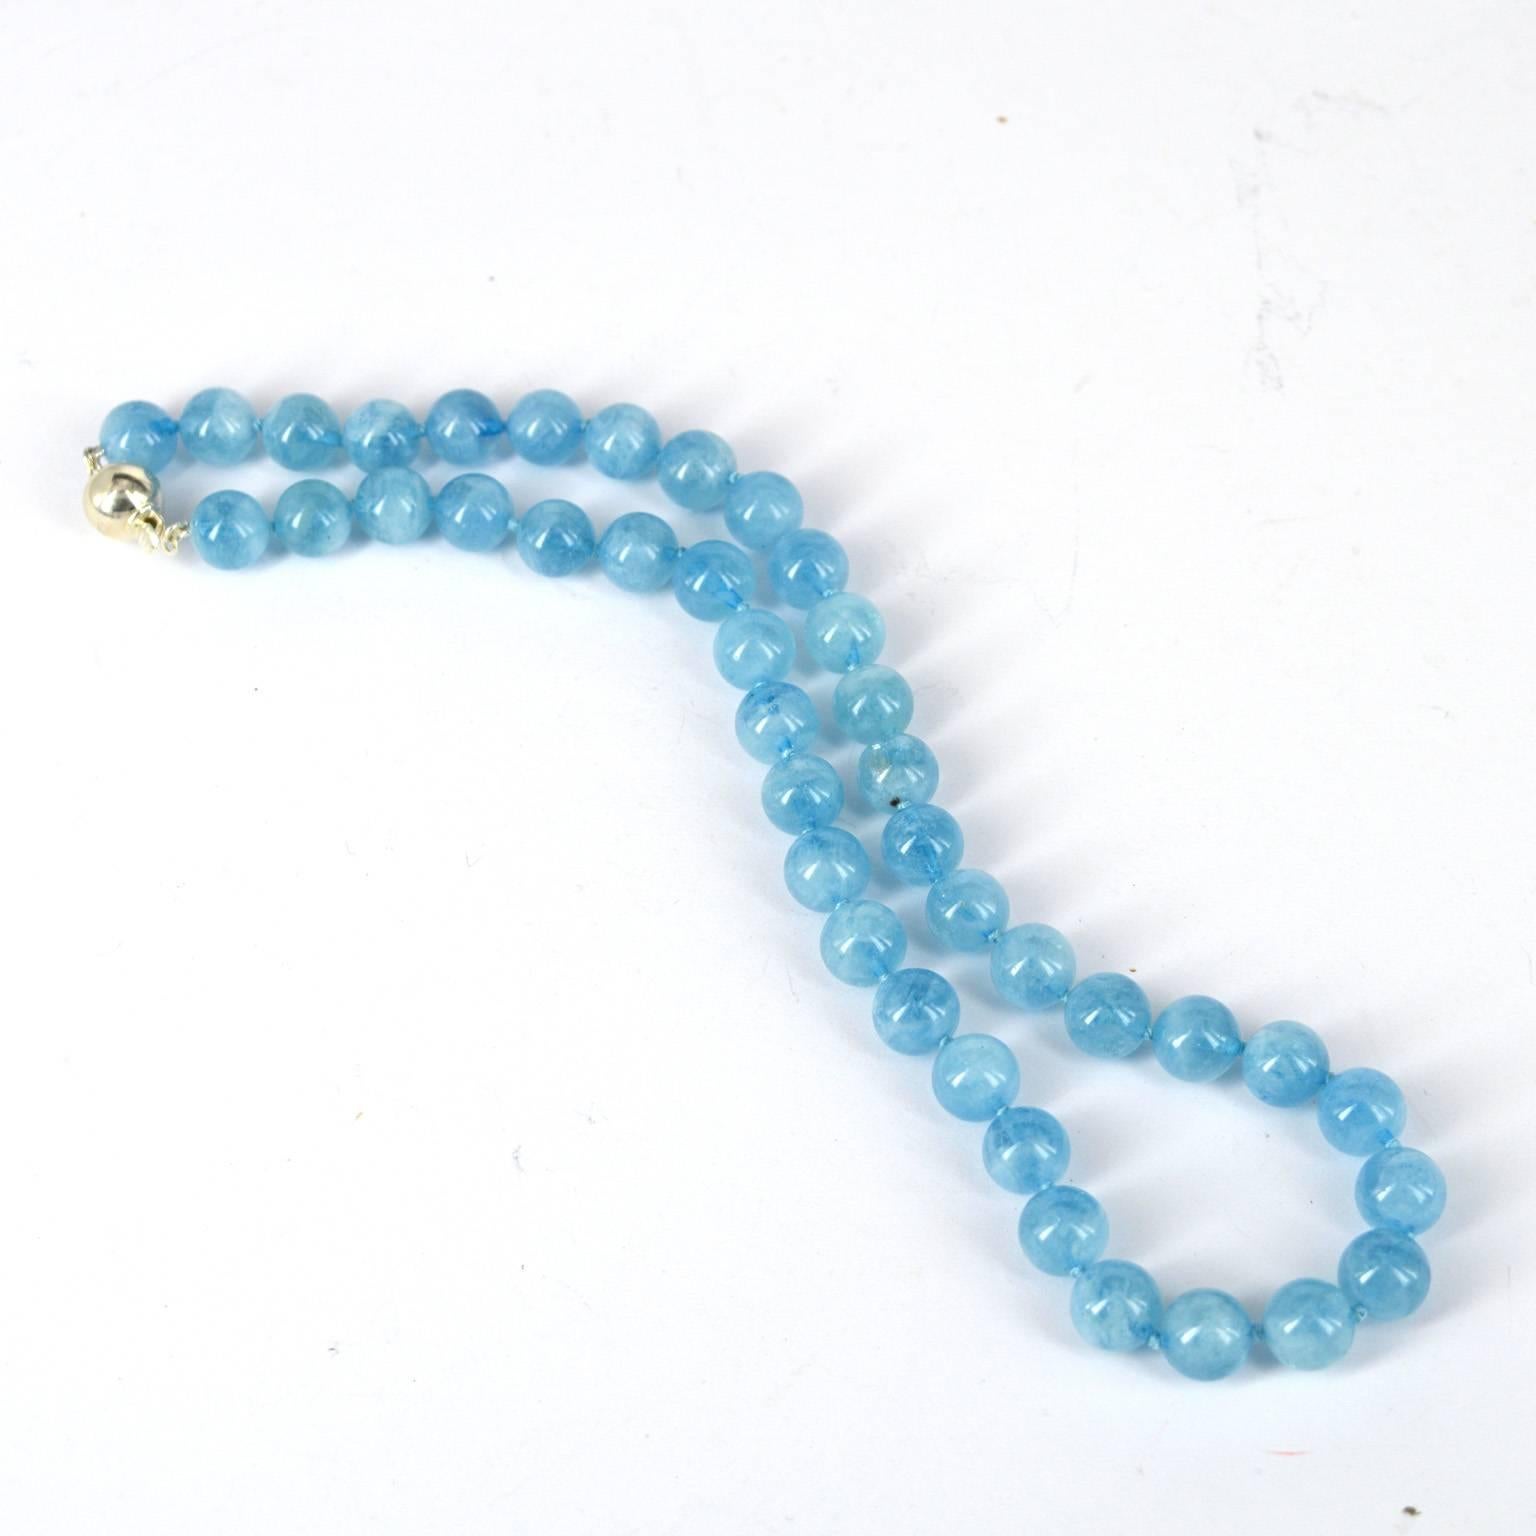 10mm polished round natural blue Aquamarine necklace.
Sterling Silver 10mm round ball clasp.
45cm necklace.